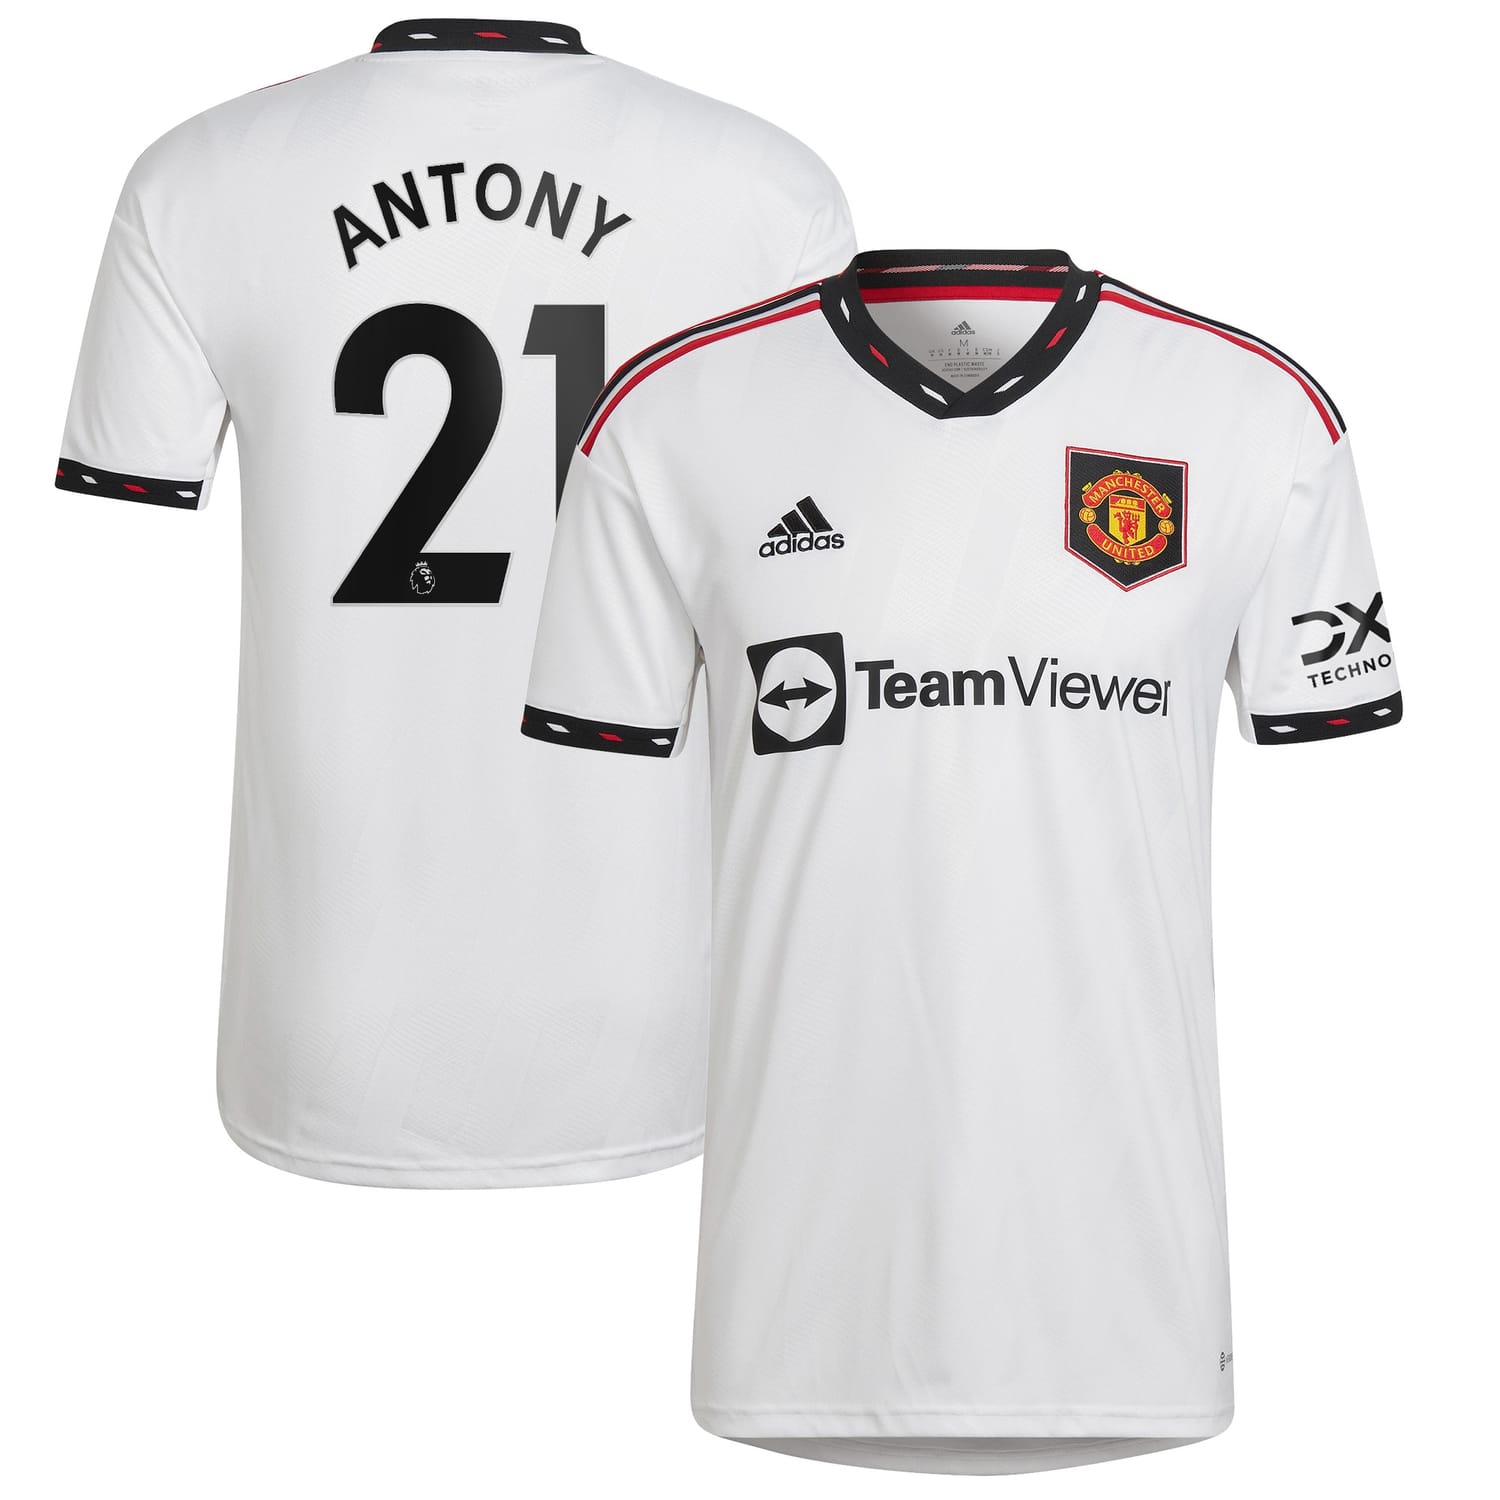 Premier League Manchester United Away Jersey Shirt 2022-23 player Antony 21 printing for Men